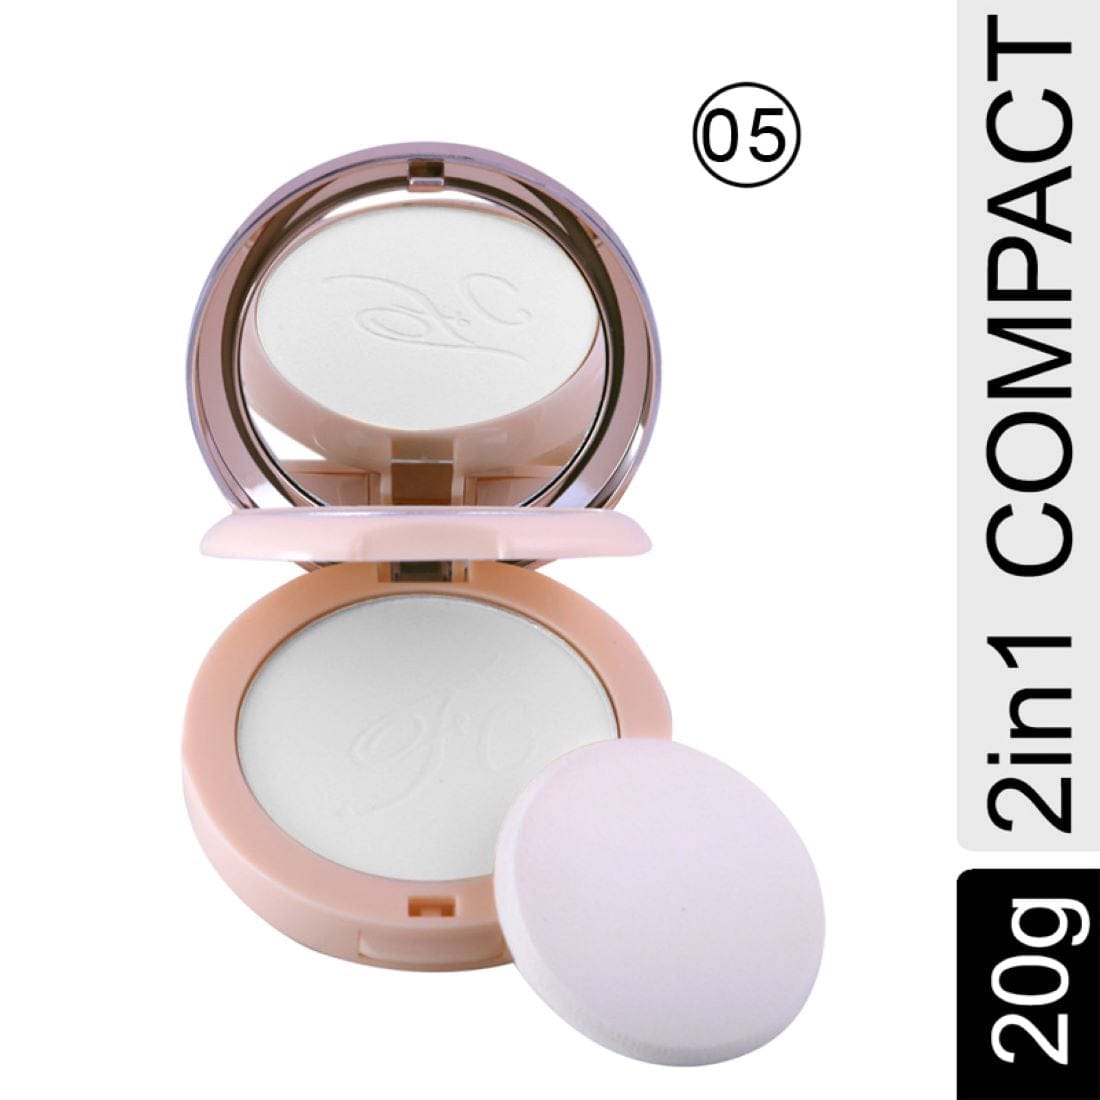 This is a new generation of oil control formulas designed to create nude makeup that is flawless natural and invisible. This two-in-one face powder sets your makeup in a nude finish without a trace of color. Two pieces of powder cake help to achieve the makeover more casually. The images represent the actual product though the color of the image and product may slightly differ. Long-Lasting, Dermatology approved